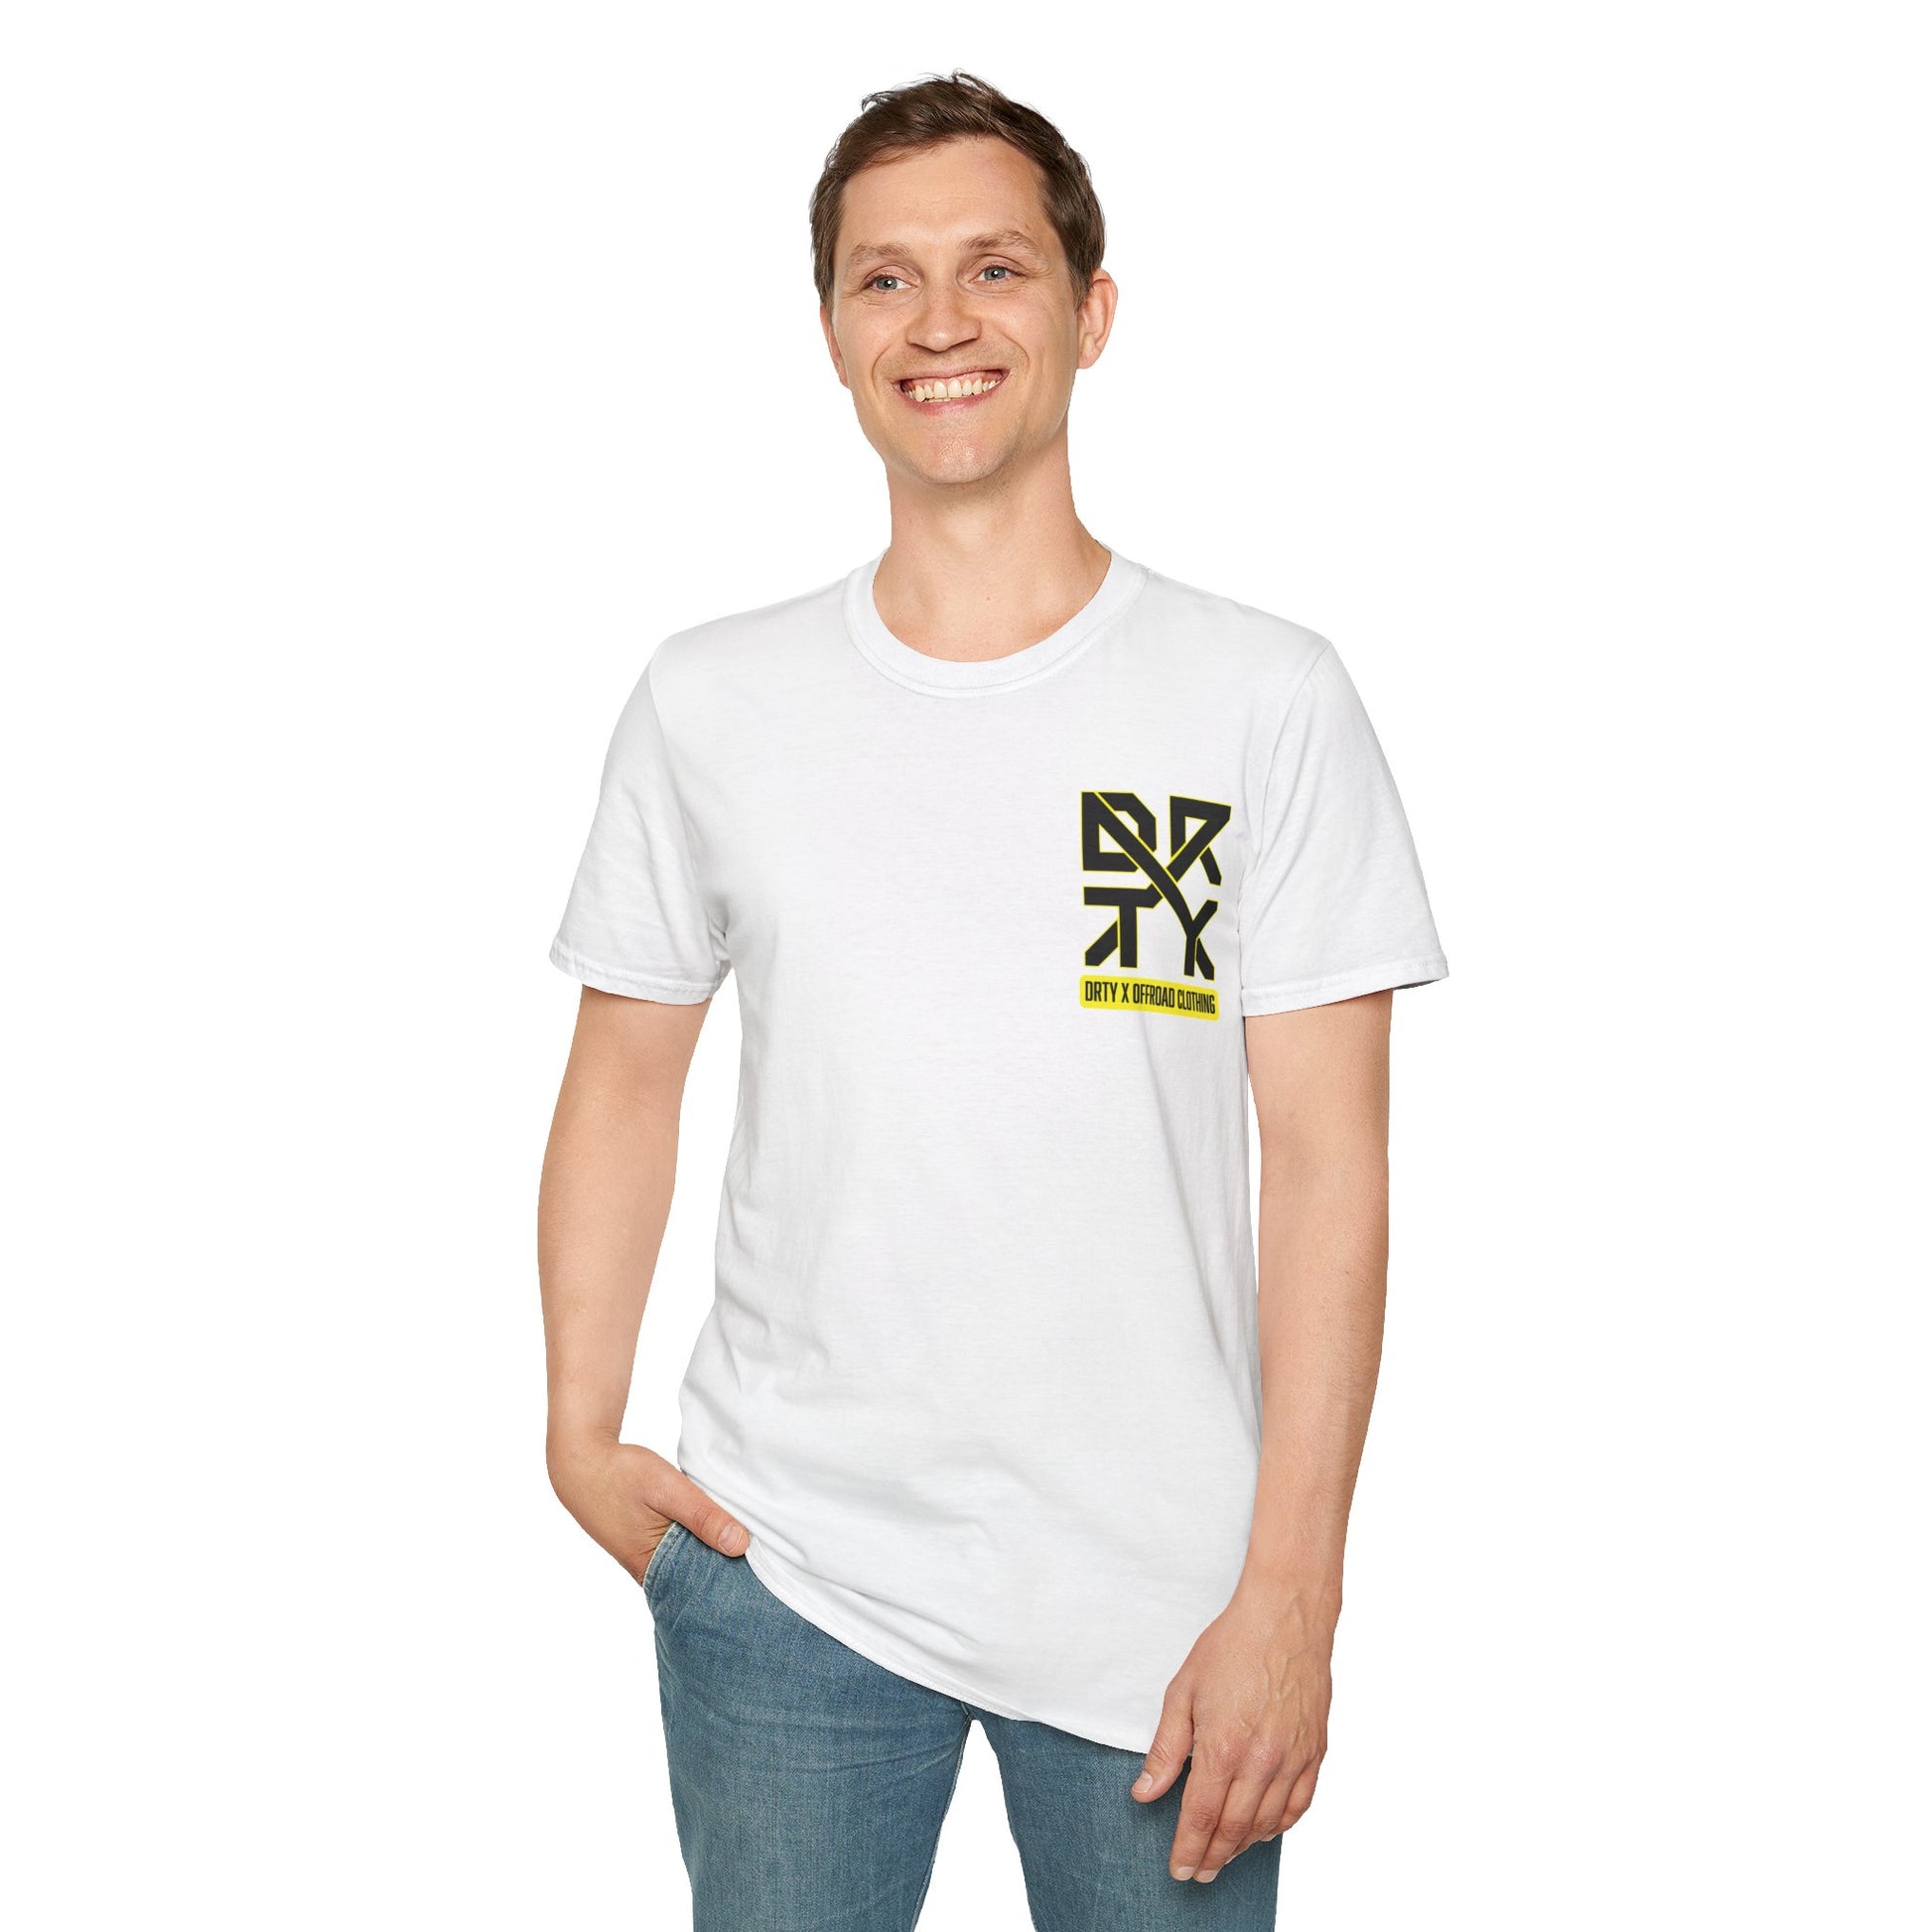 This image showcases a front view of a man wearing T-shirt with a left front chest with a DRTY X logo.